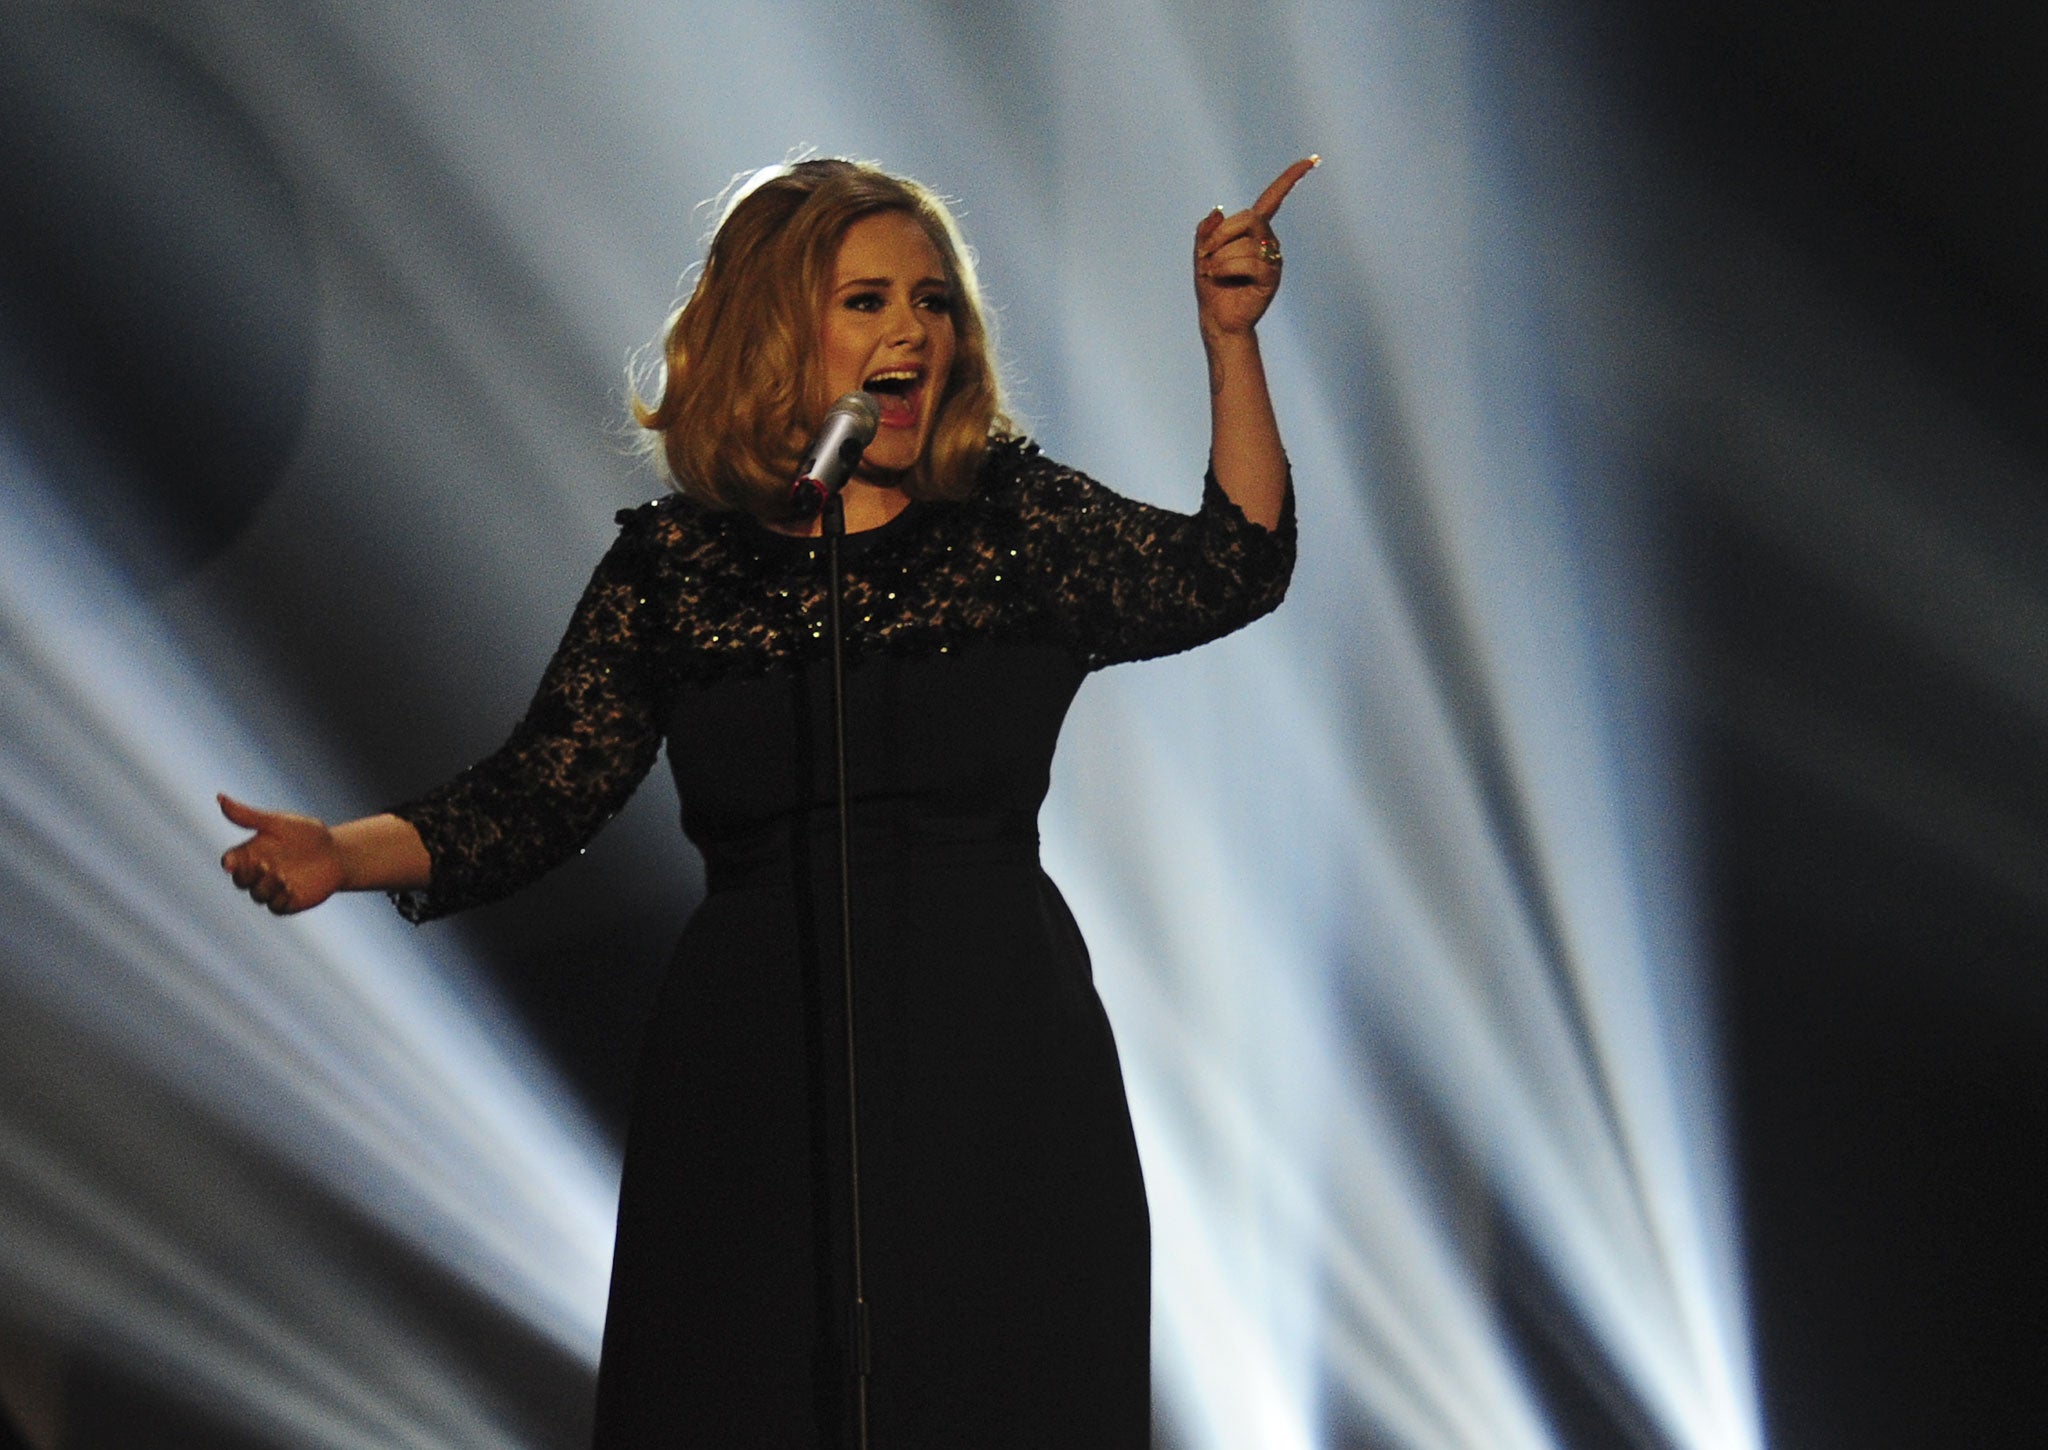 Adele performs onstage during the 2011 MTV Video Music Awards at Nokia Theatre L.A